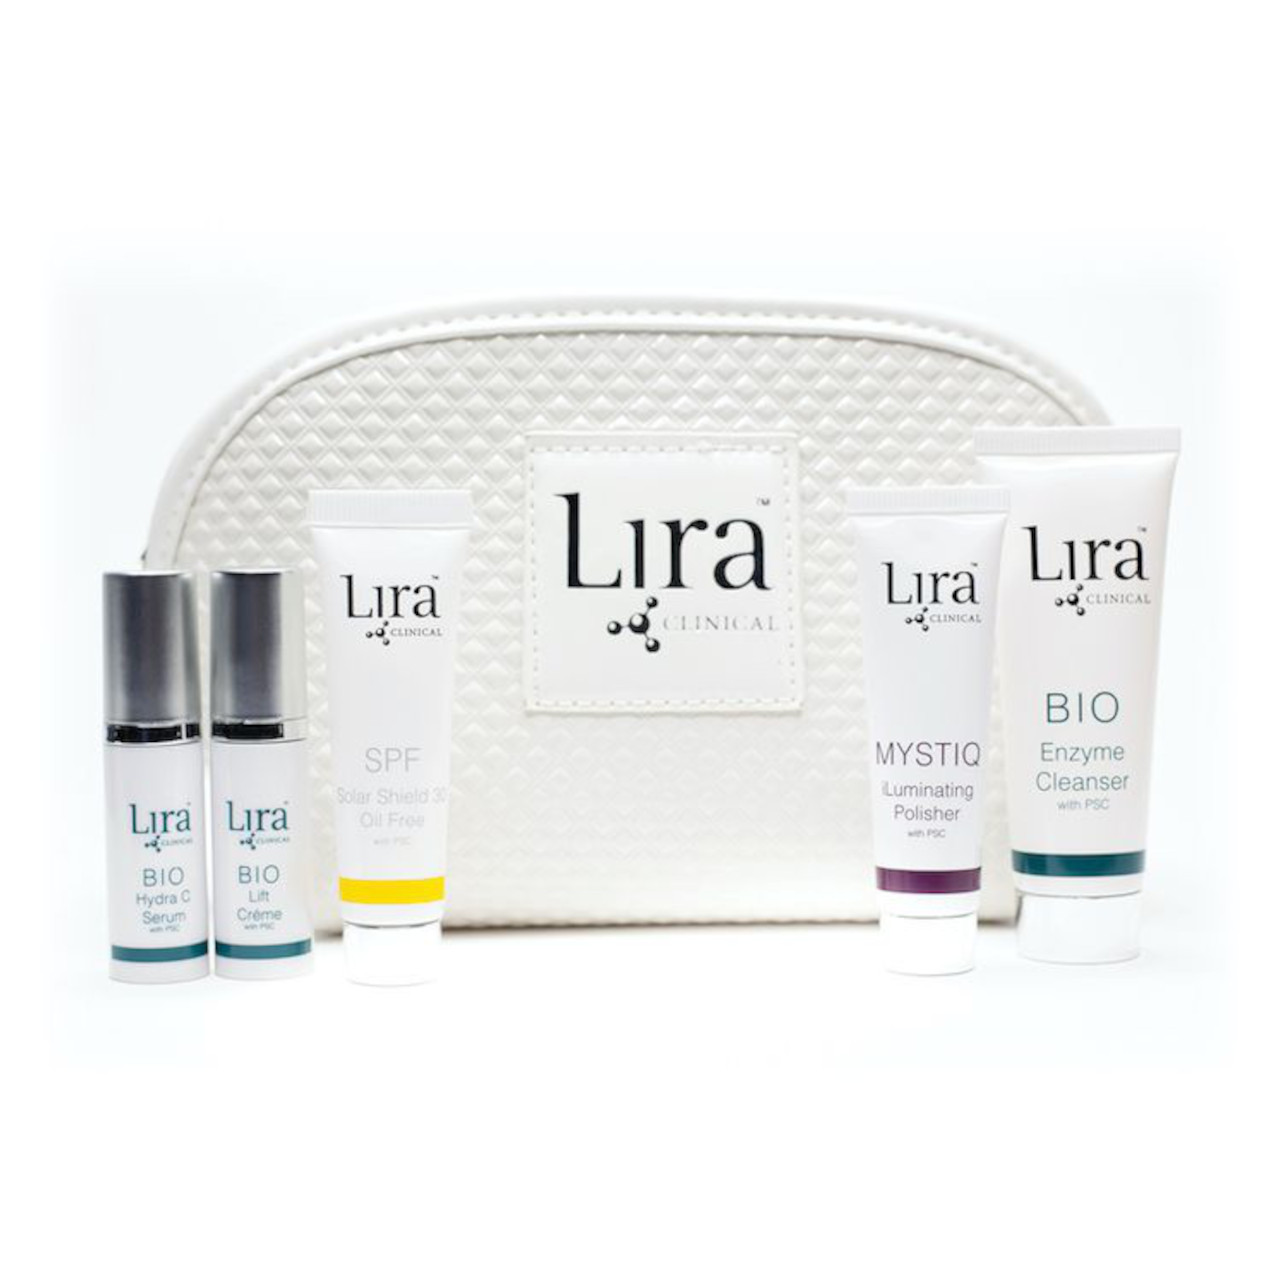 Lira Clinical Travel/Post Care Kit (00357) Questions & Answers